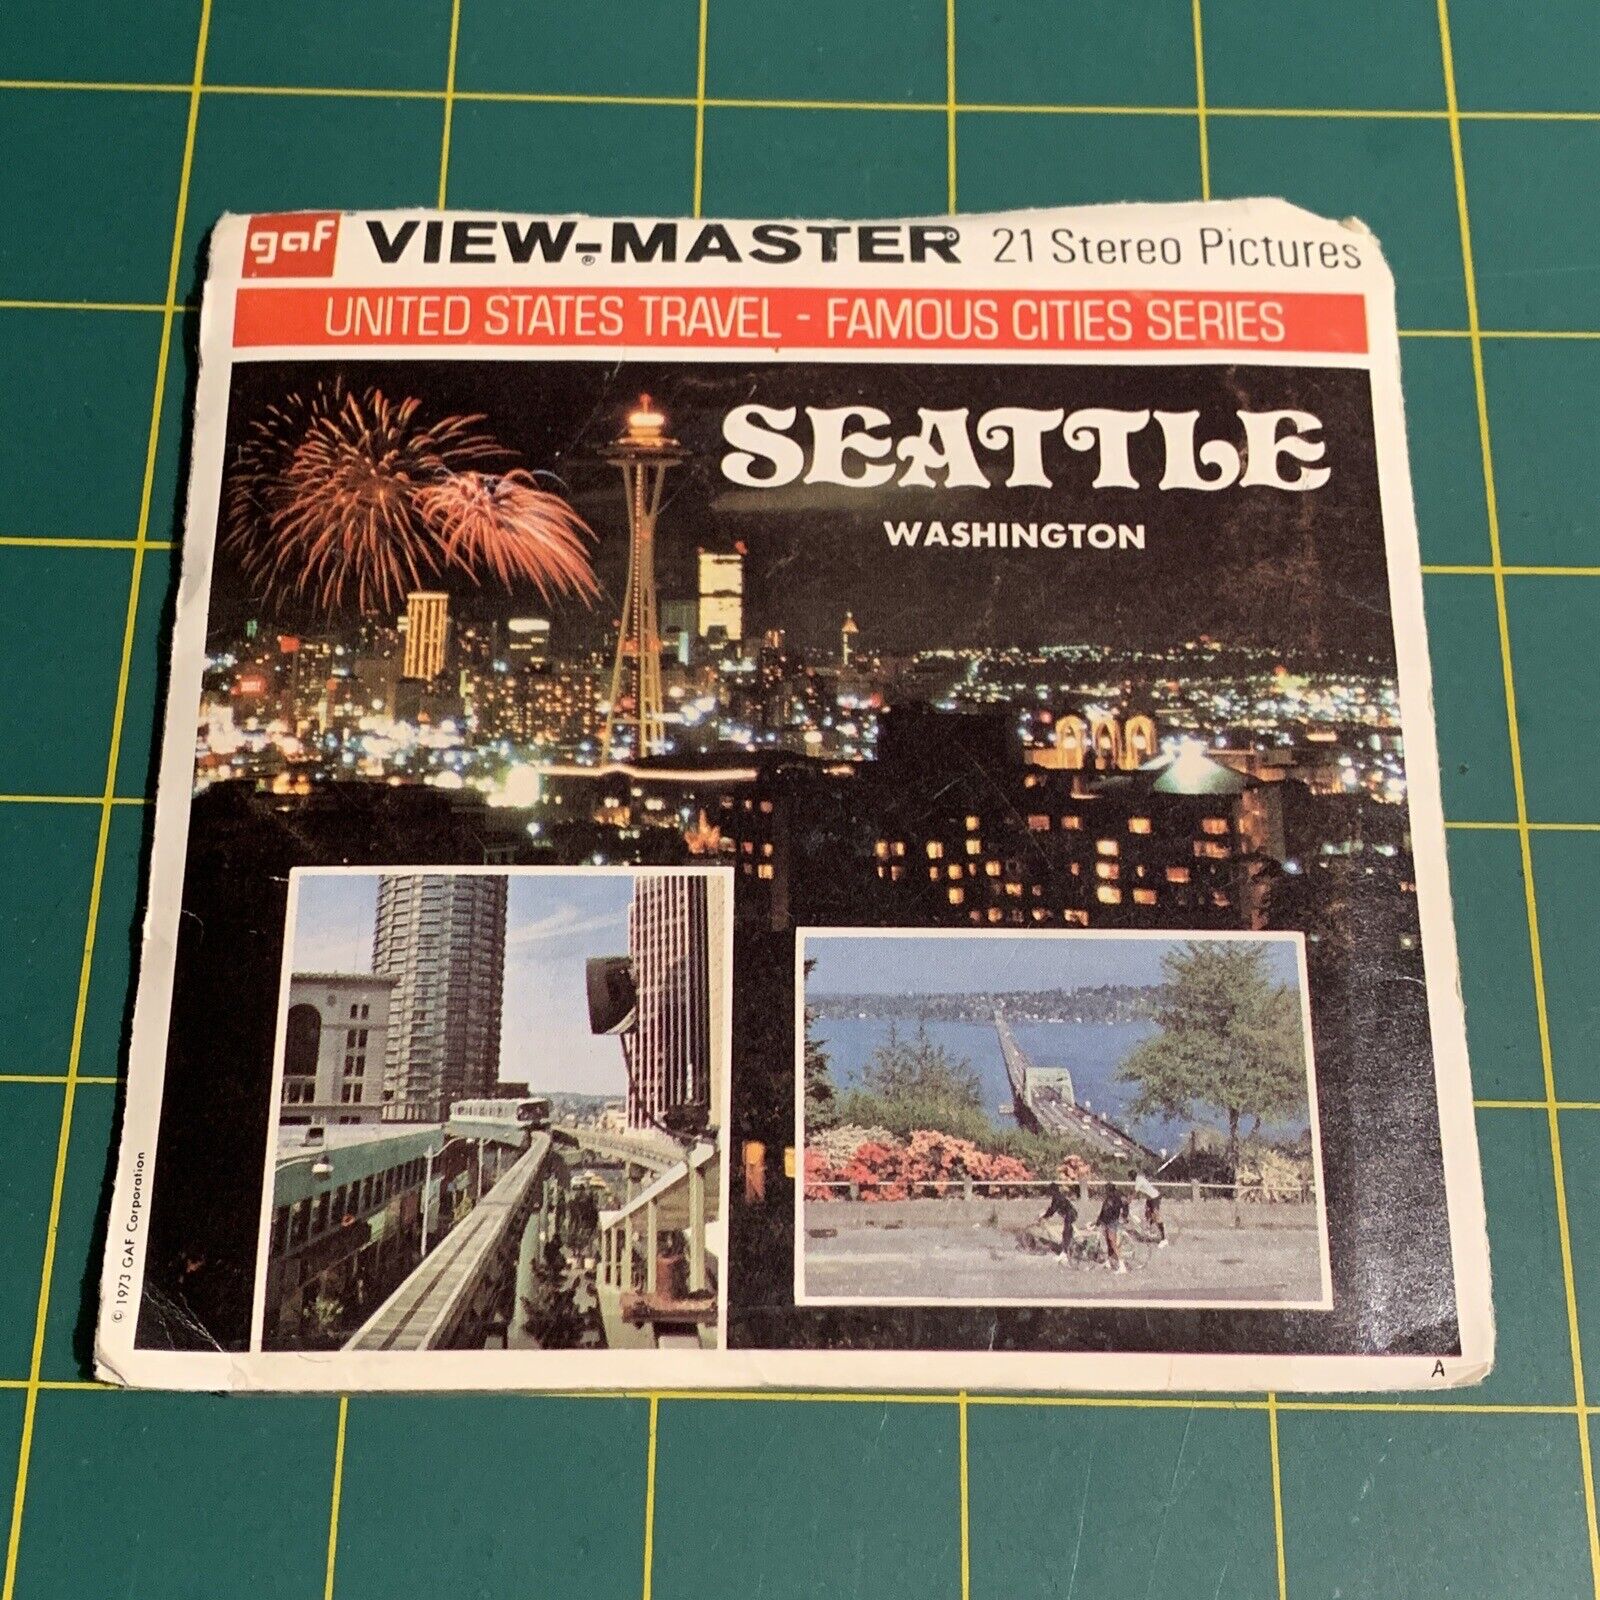 Gaf A274 Seattle Washington Famous Cities Series view-master Reels Packet 2D